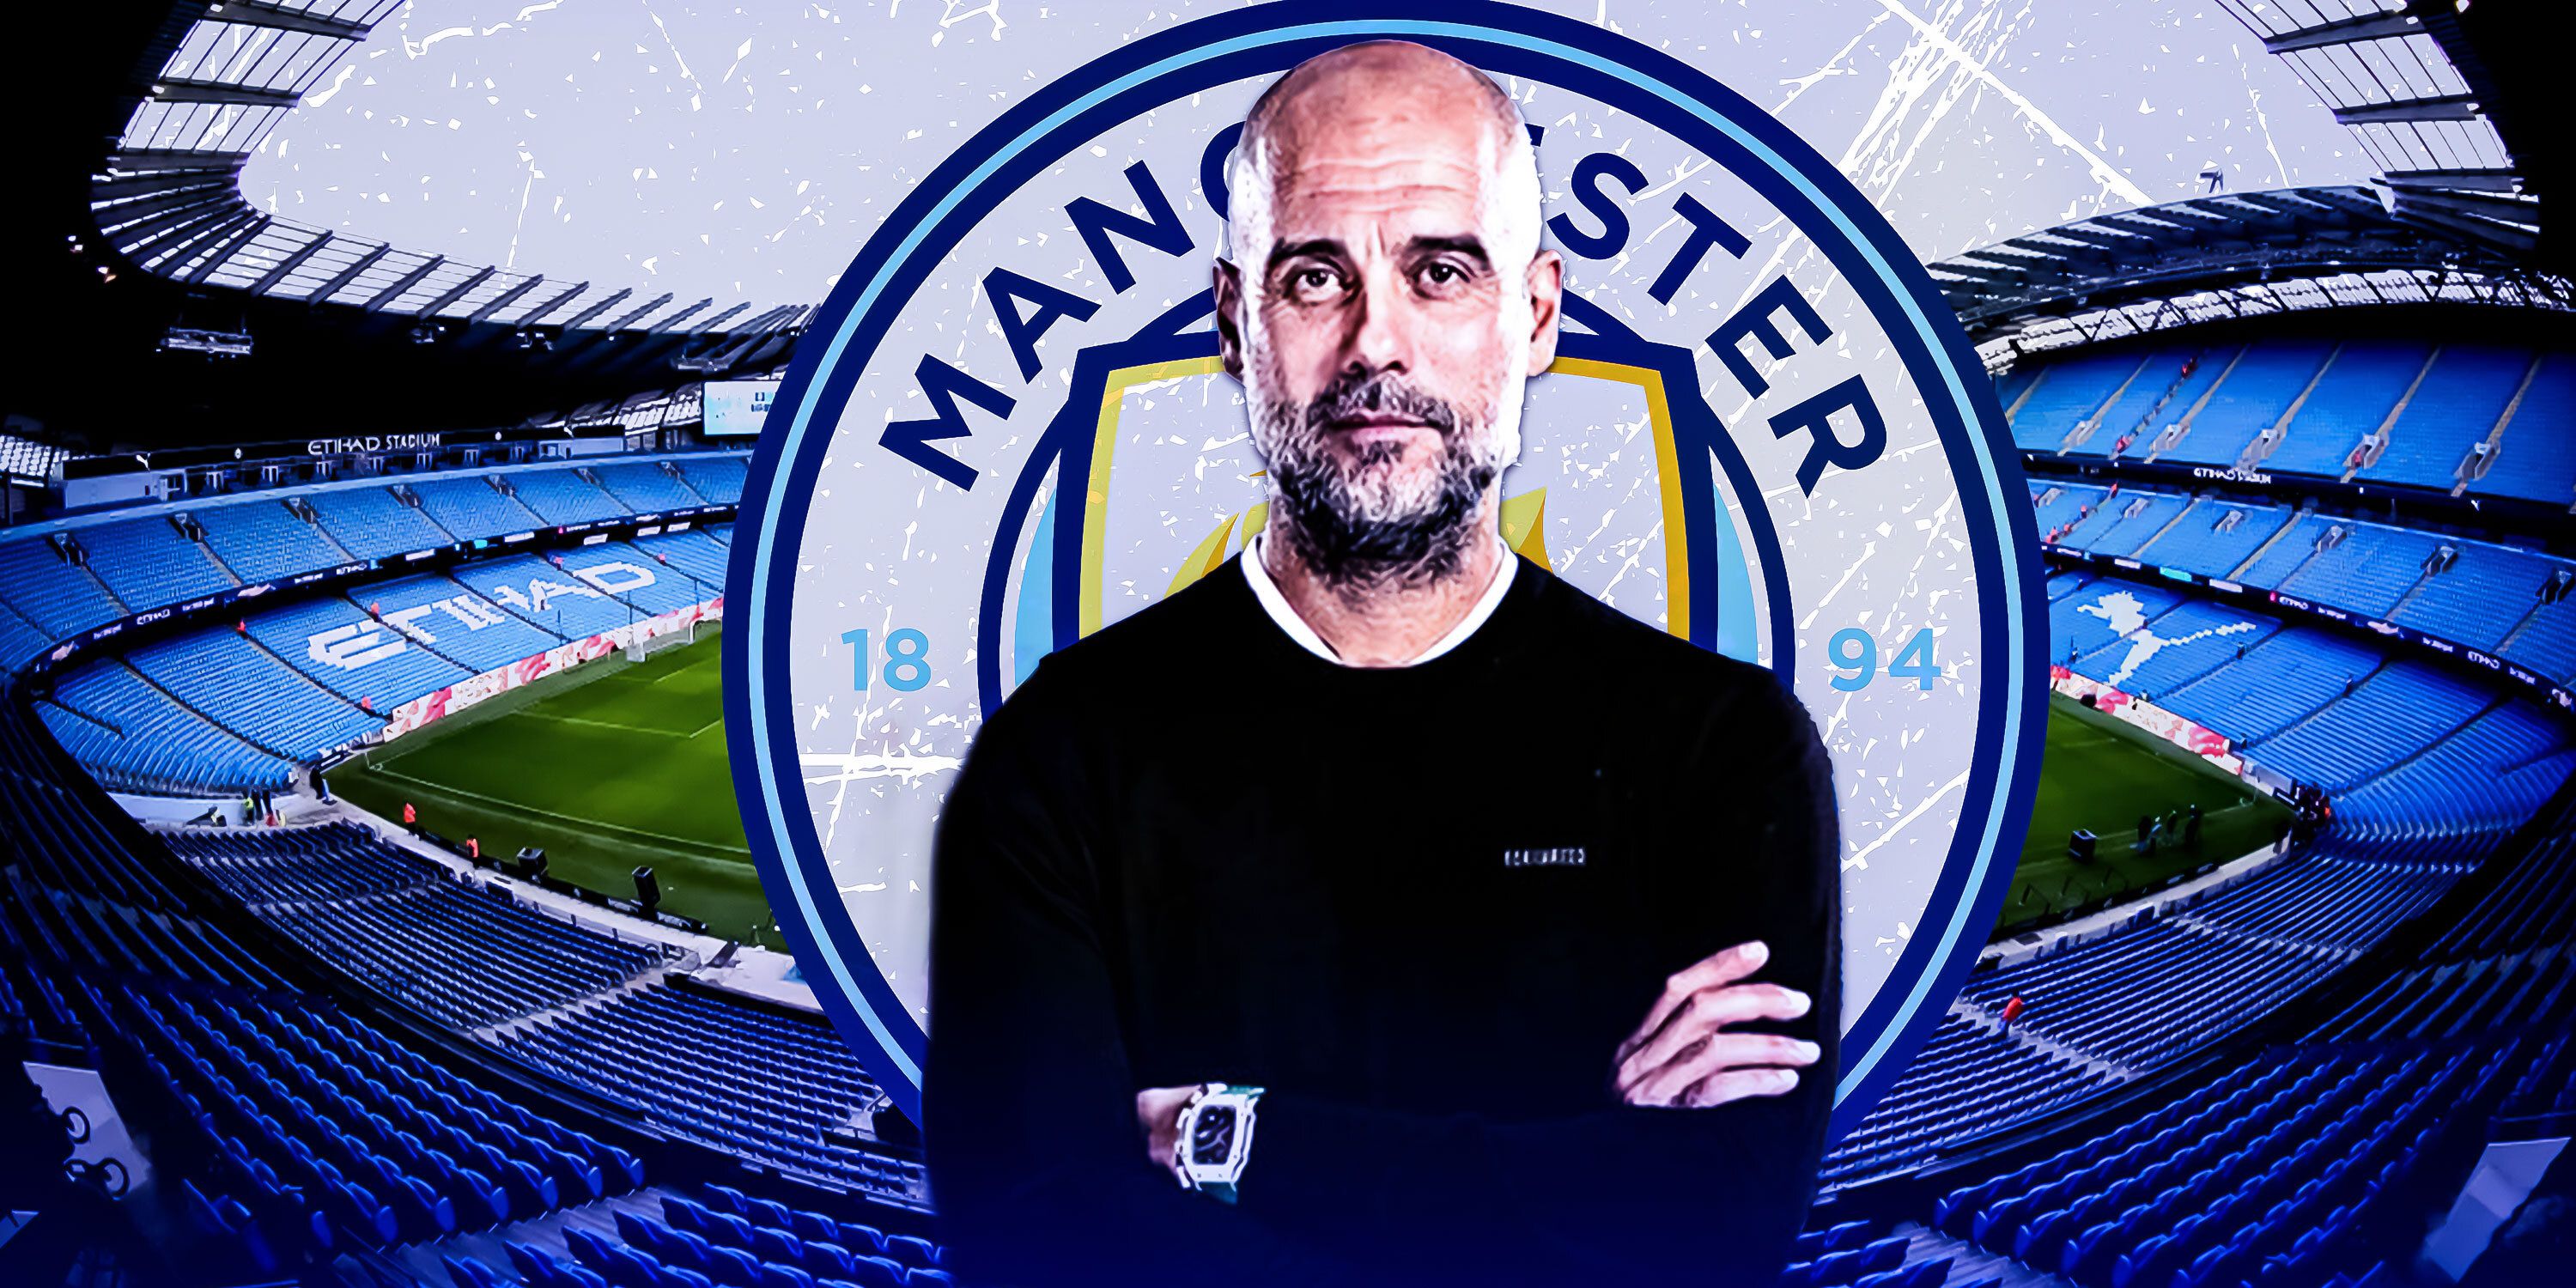 Manchester City boss Pep Guardiola in front of the Etihad Stadium